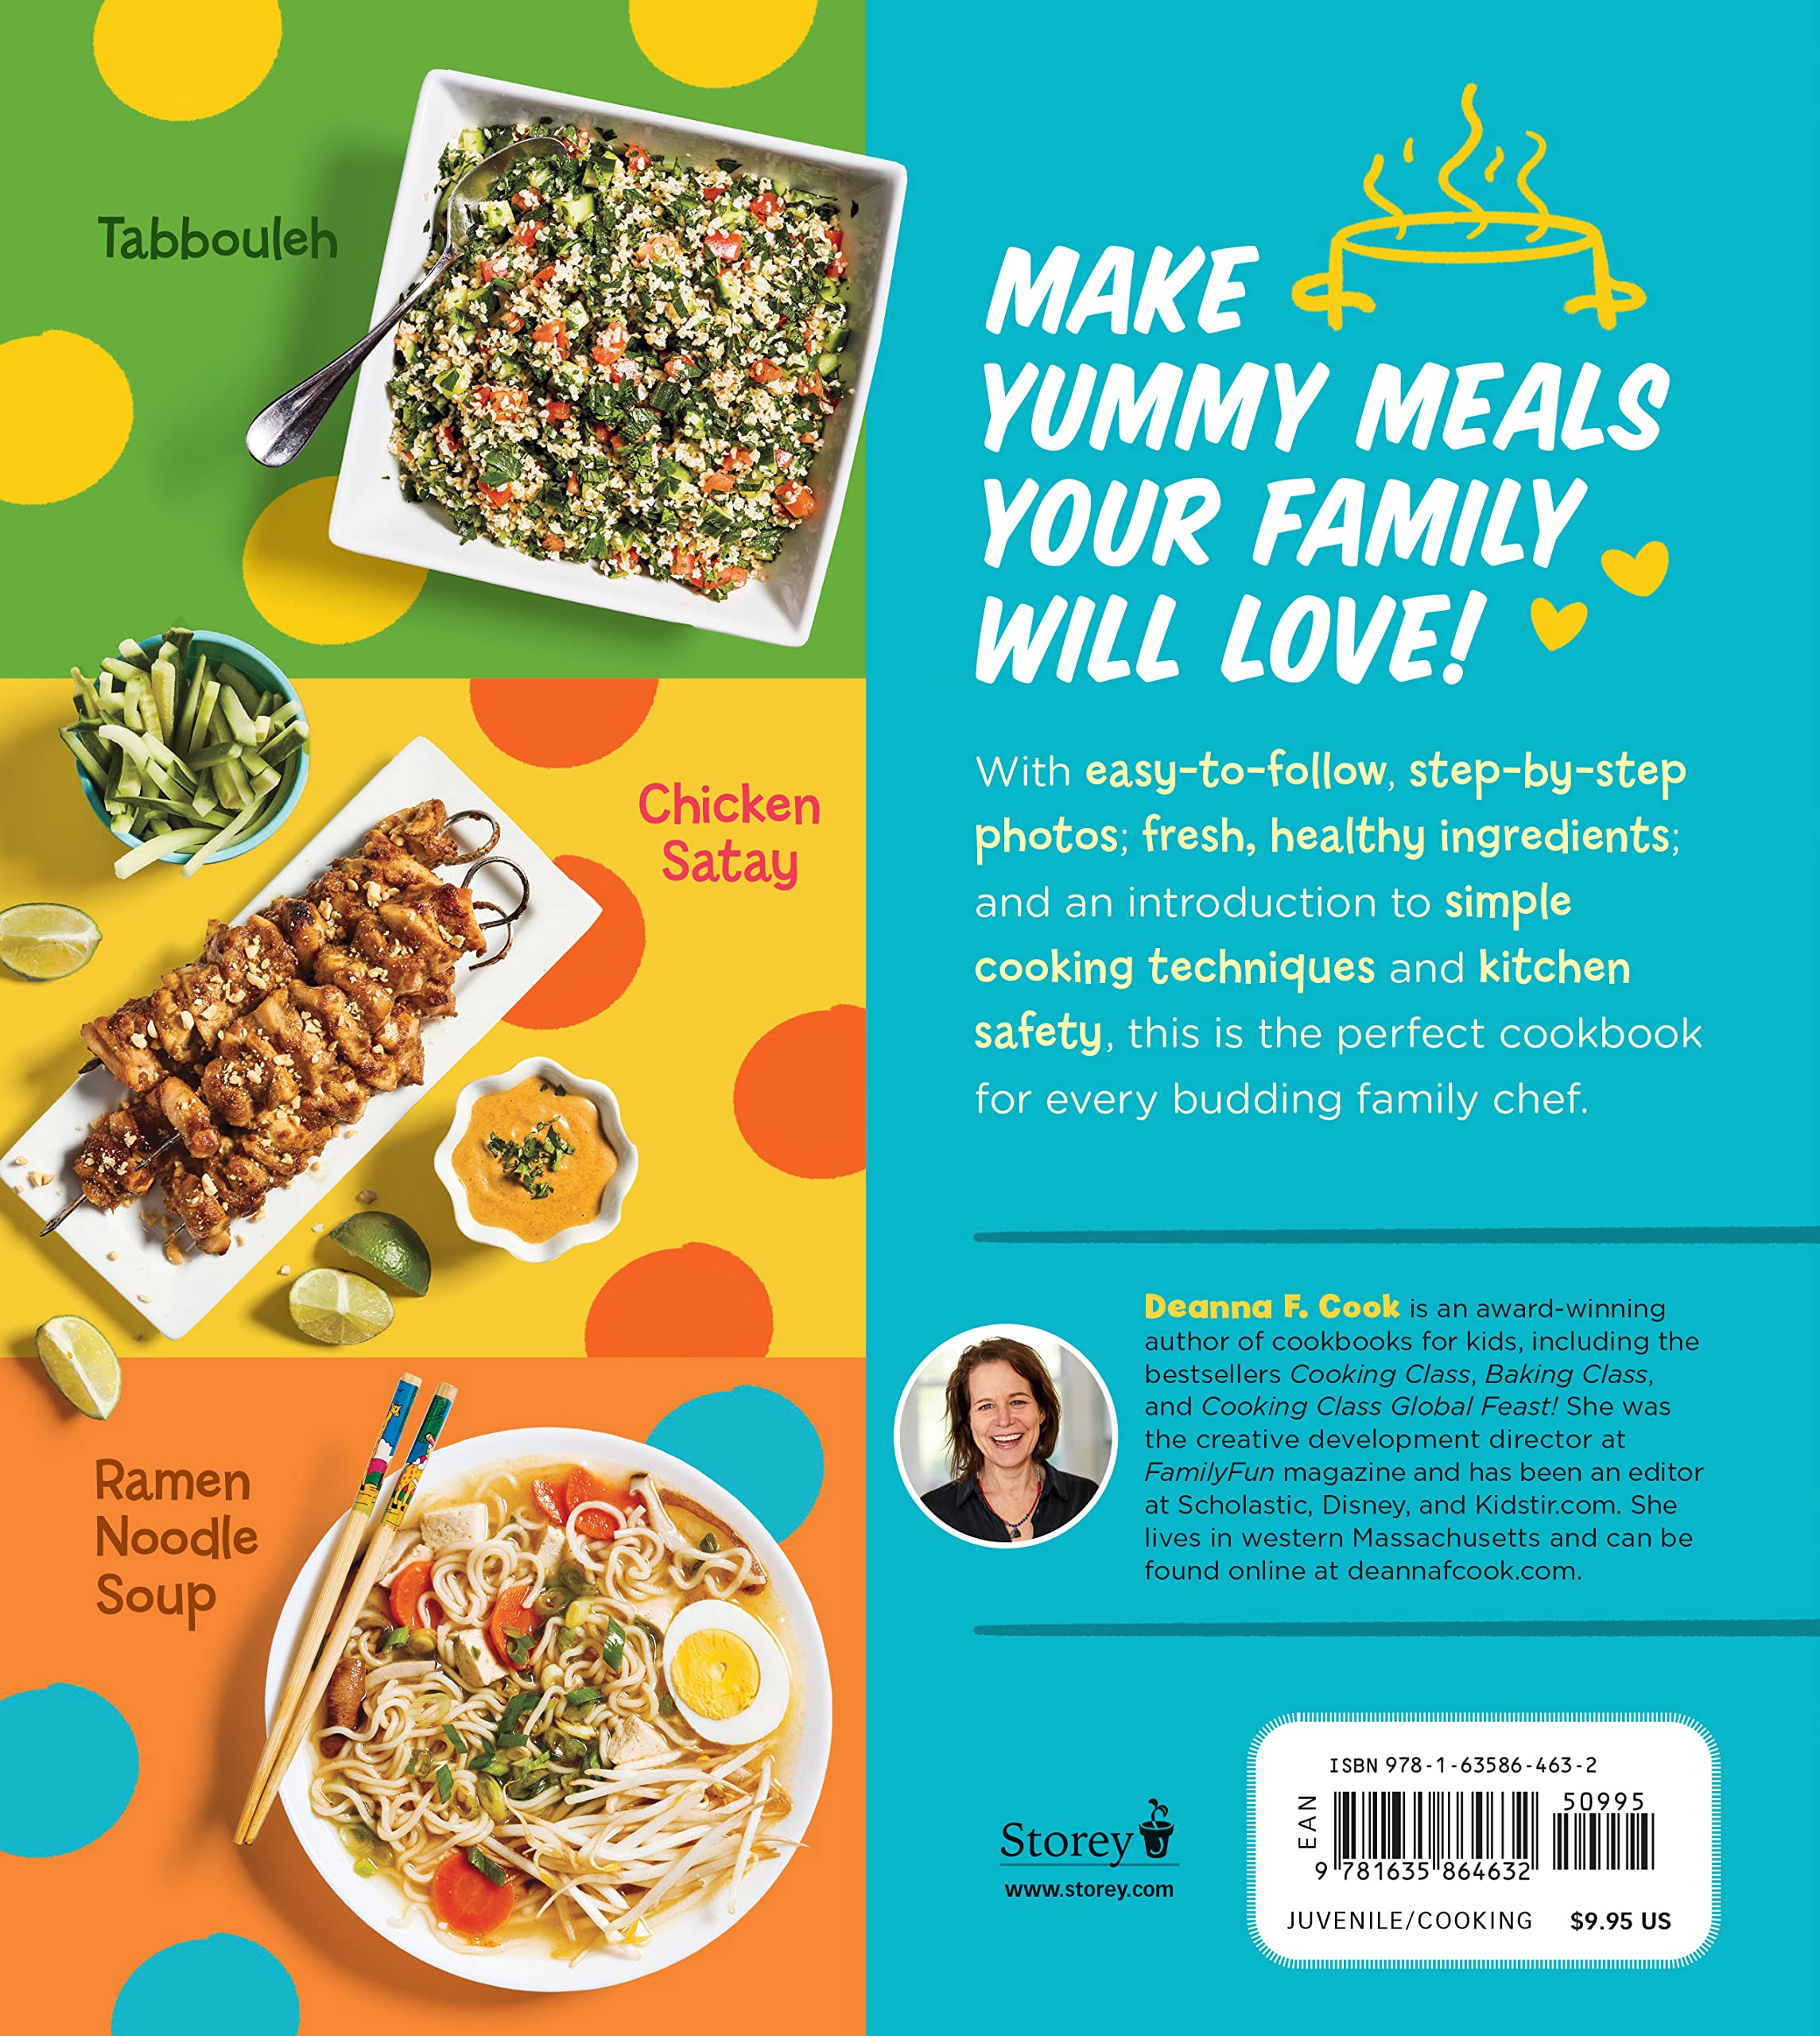 Kids Cook Dinner: 23 Healthy, Budget-Friendly Meals from the Best-Selling Cooking Class Series